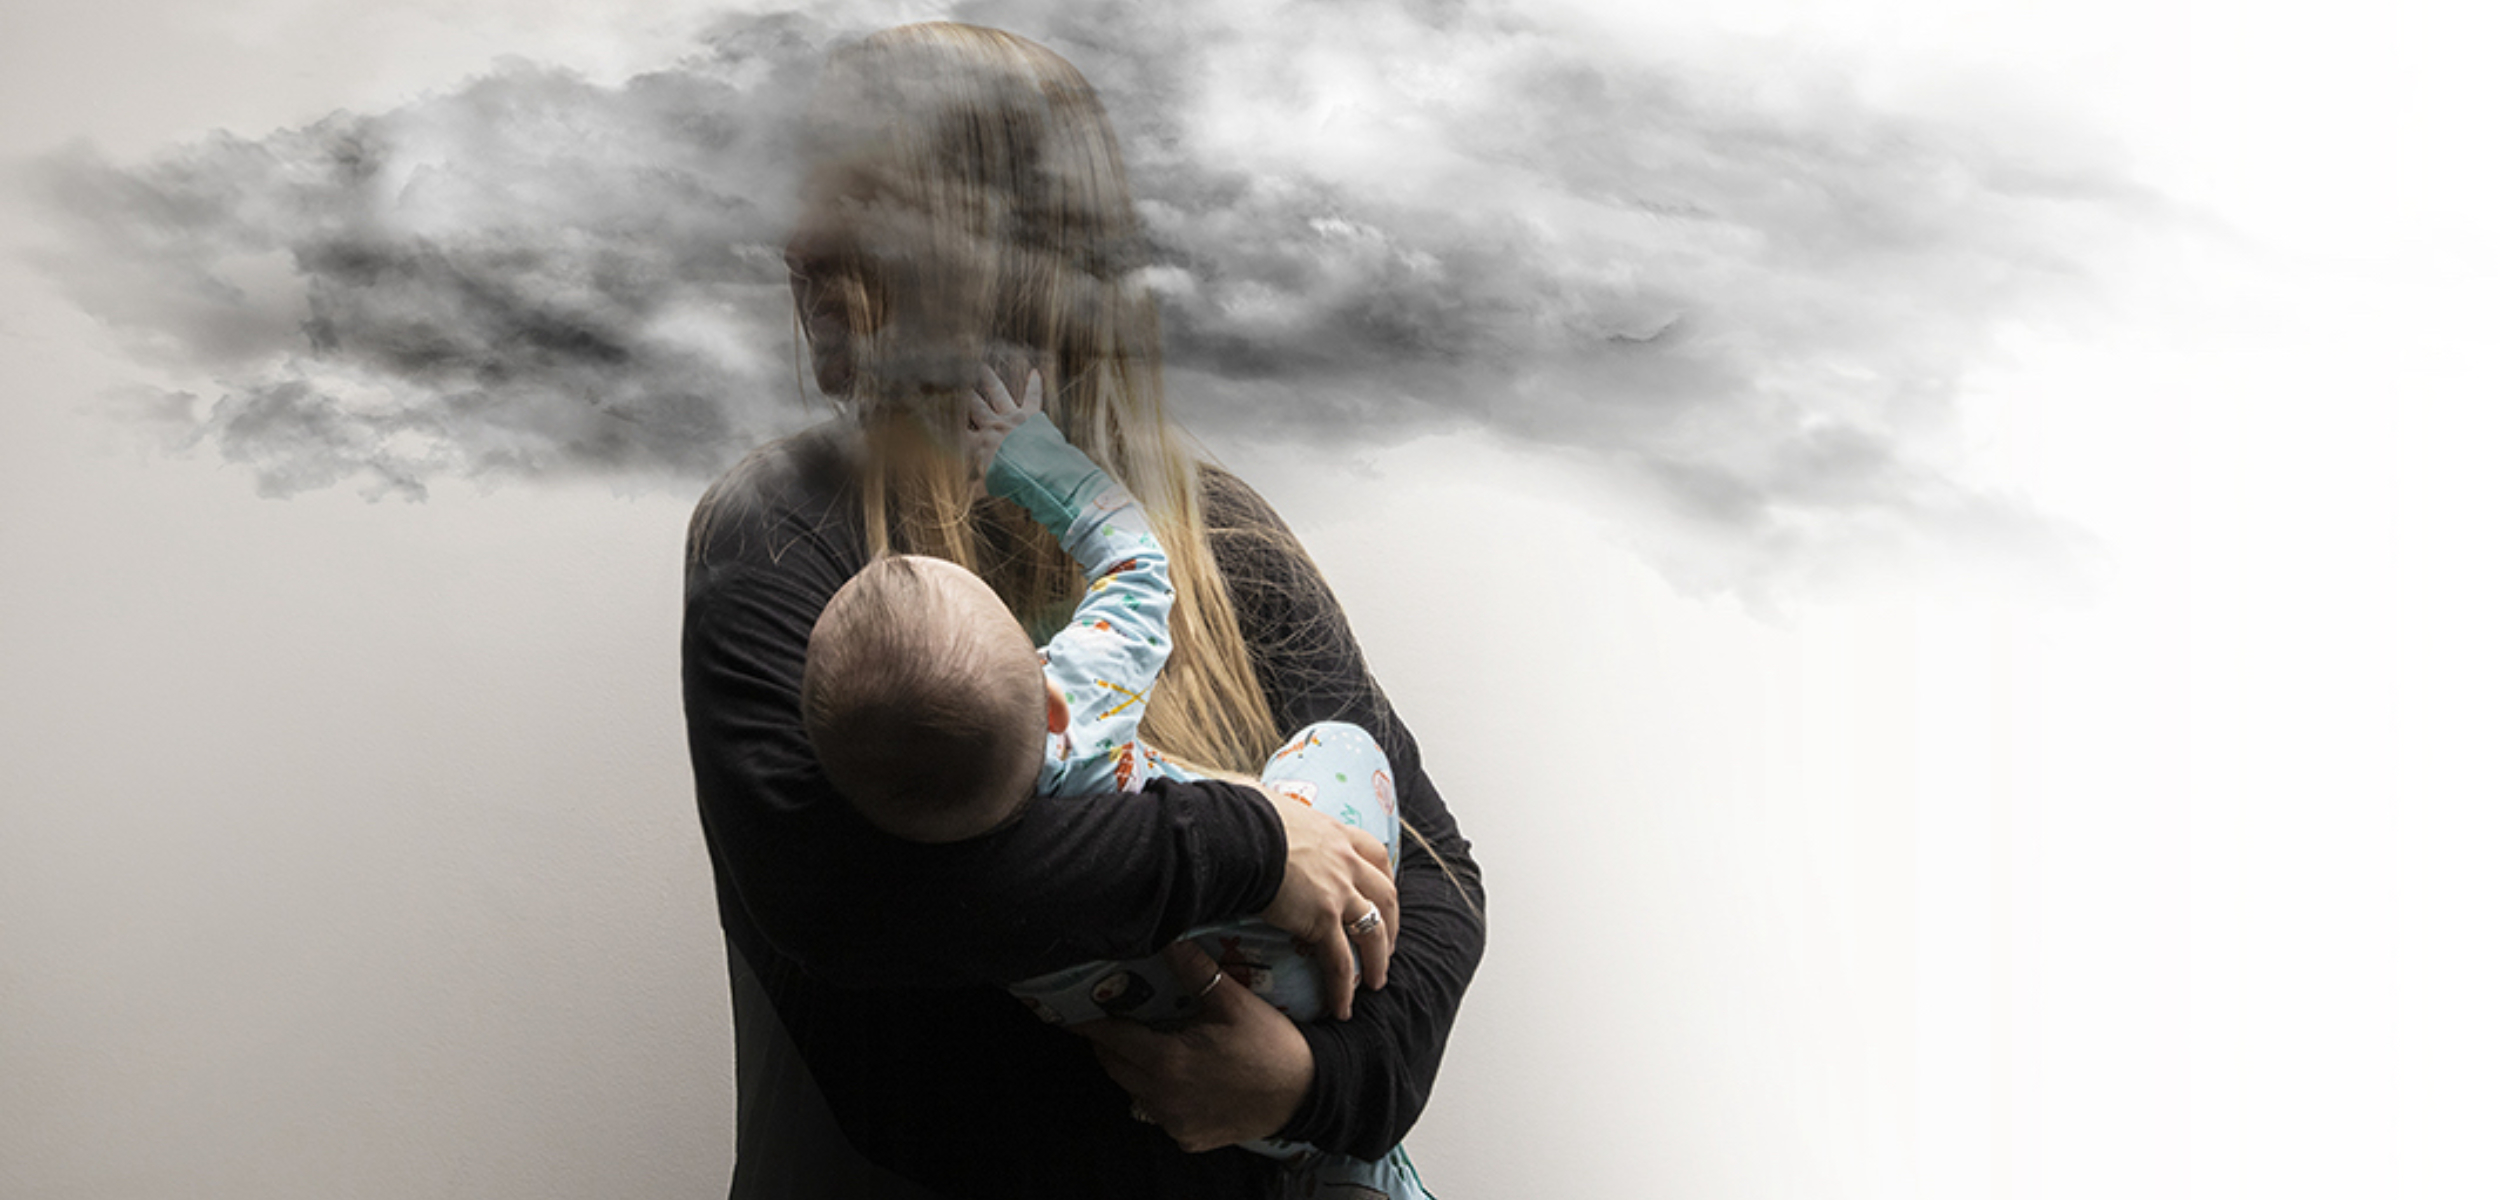 CWU Researchers Reveal that Maternal Depression Is On the Rise During Pandemic